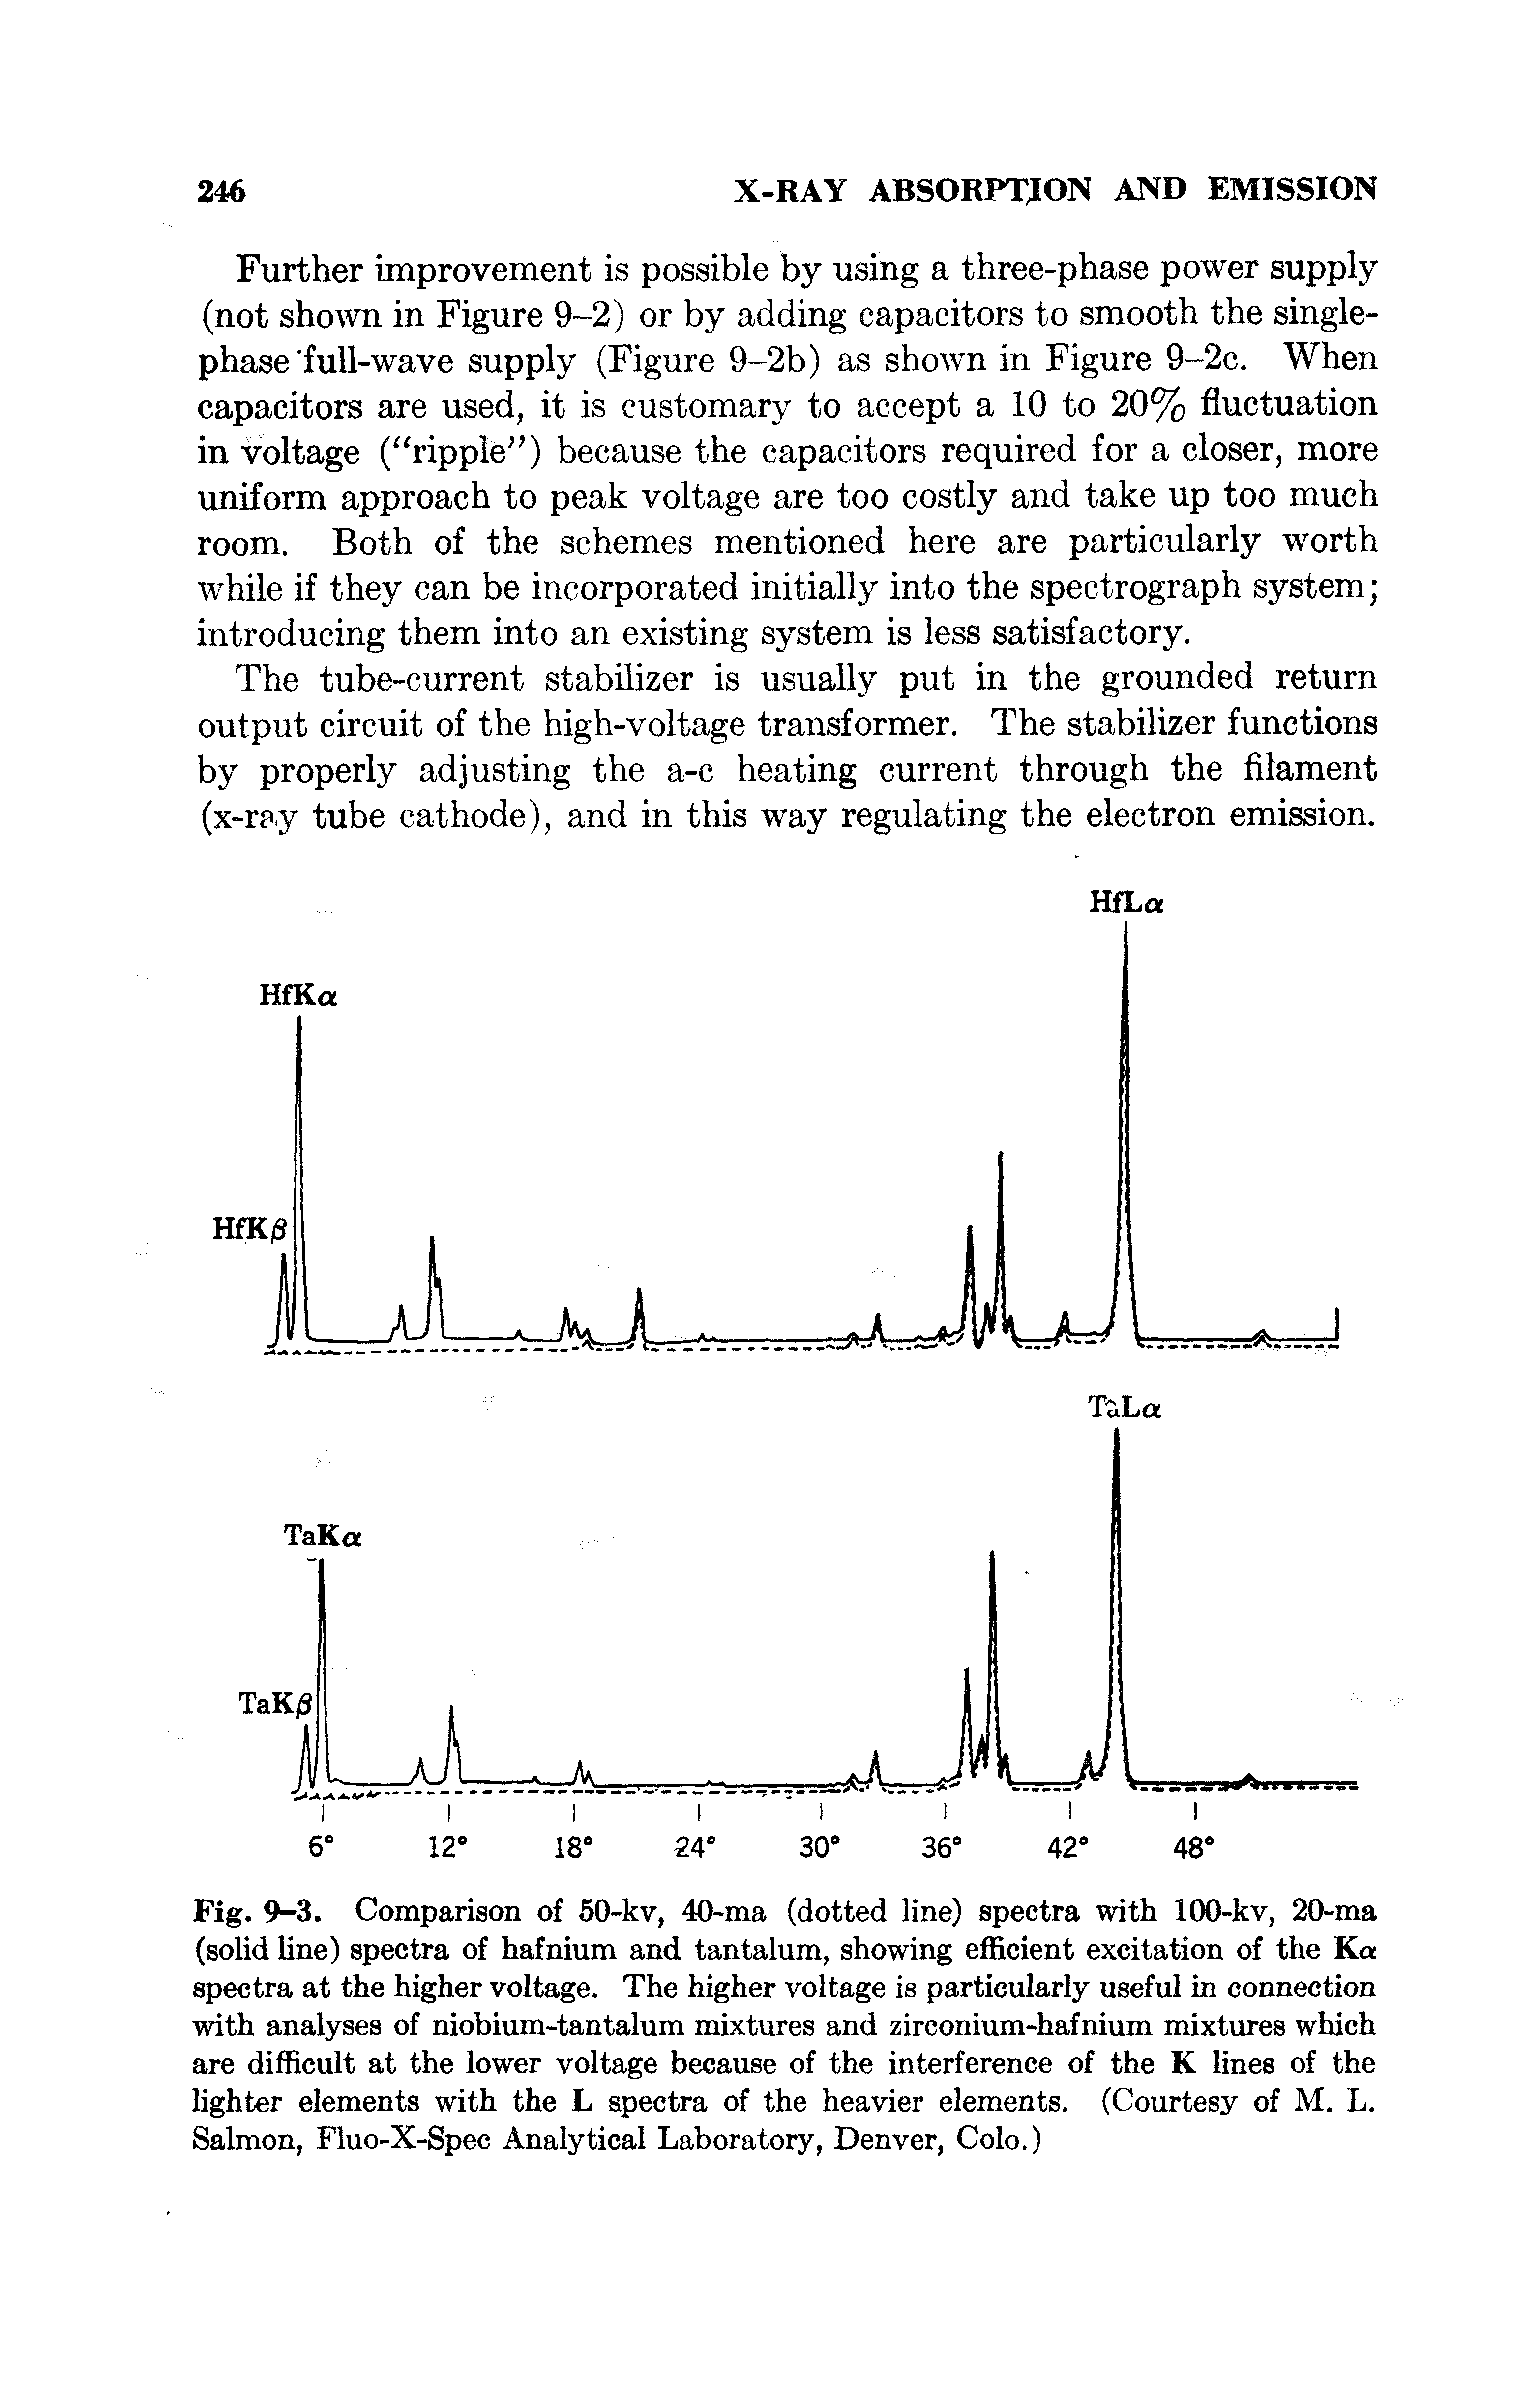 Fig. 9-3. Comparison of 50-kv, 40-ma (dotted line) spectra with 100-kv, 20-ma (solid line) spectra of hafnium and tantalum, showing efficient excitation of the K spectra at the higher voltage. The higher voltage is particularly useful in connection with analyses of niobium-tantalum mixtures and zirconium-hafnium mixtures which are difficult at the lower voltage because of the interference of the K lines of the lighter elements with the L spectra of the heavier elements. (Courtesy of M. L. Salmon, Fluo-X-Spec Analytical Laboratory, Denver, Colo.)...